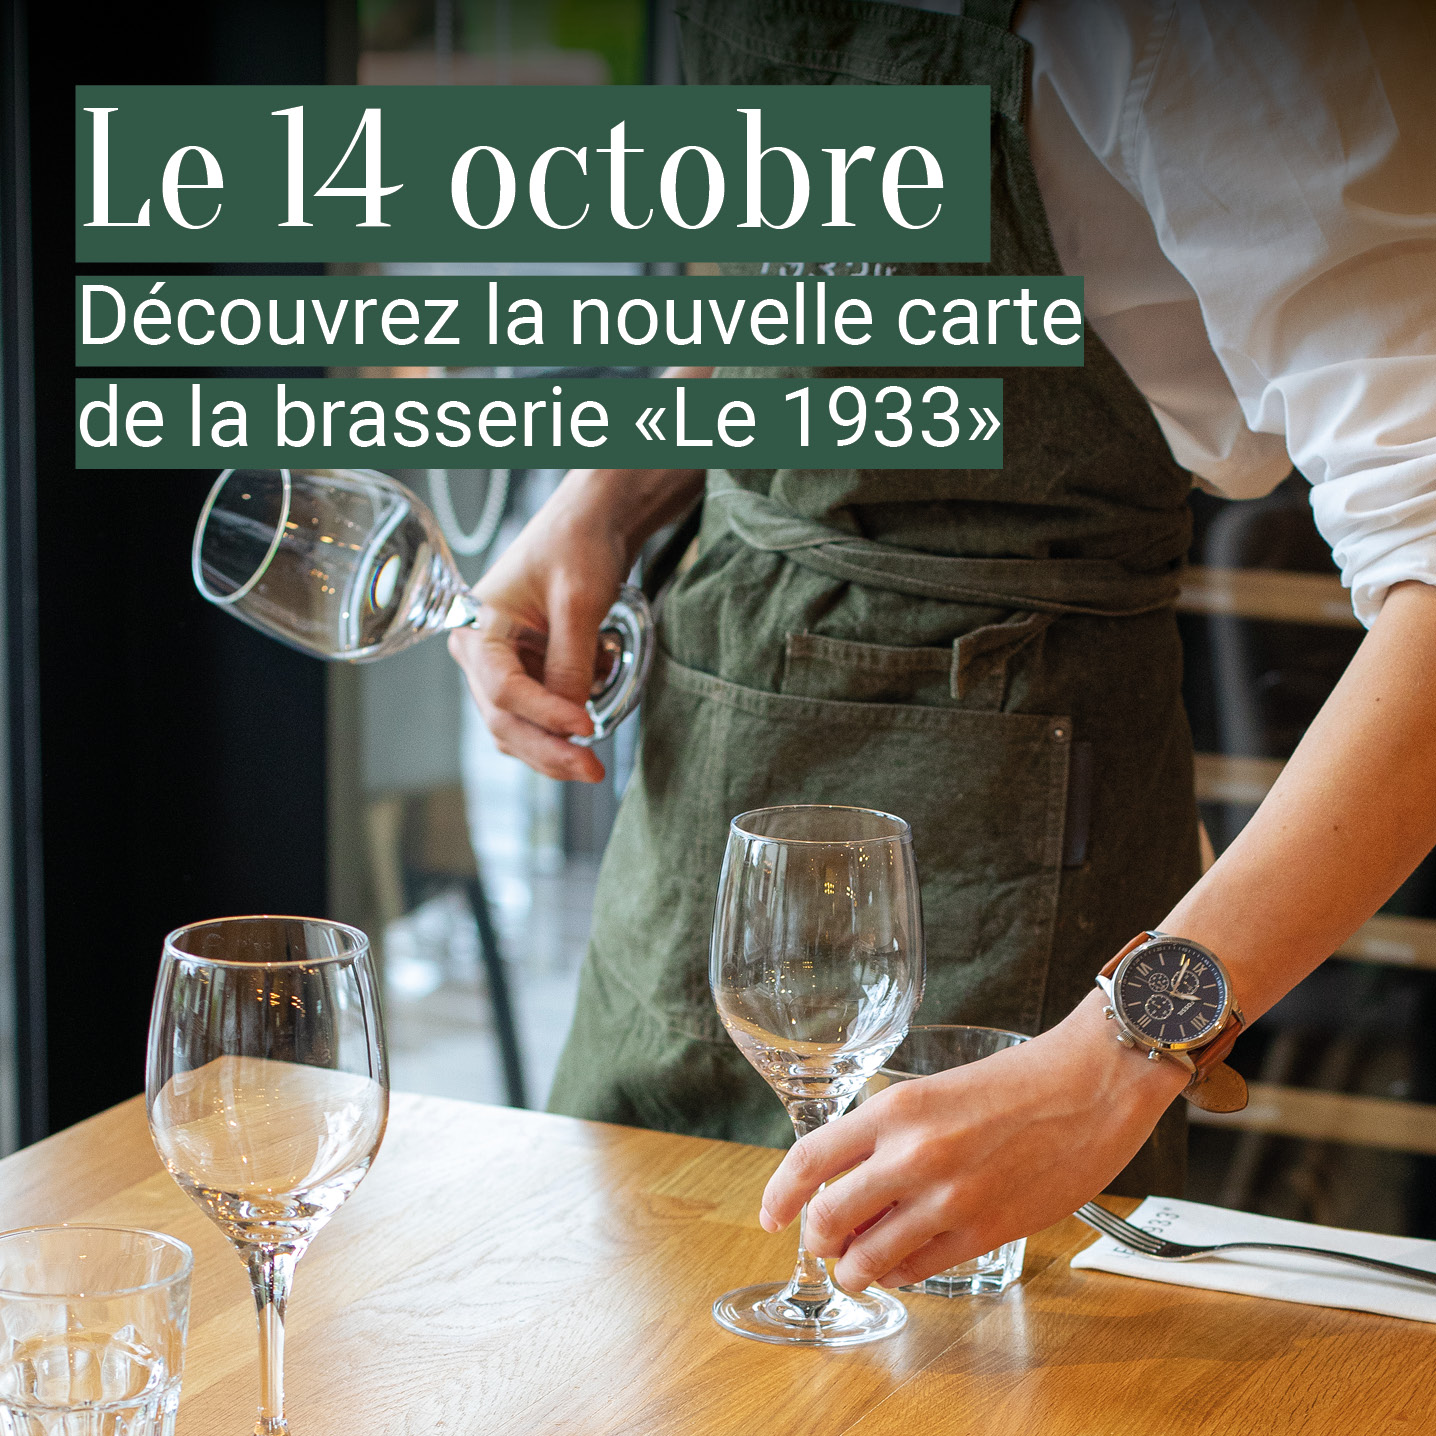 On October 14, discover the new menu of the brasserie "Le 1933" at La Charpinière